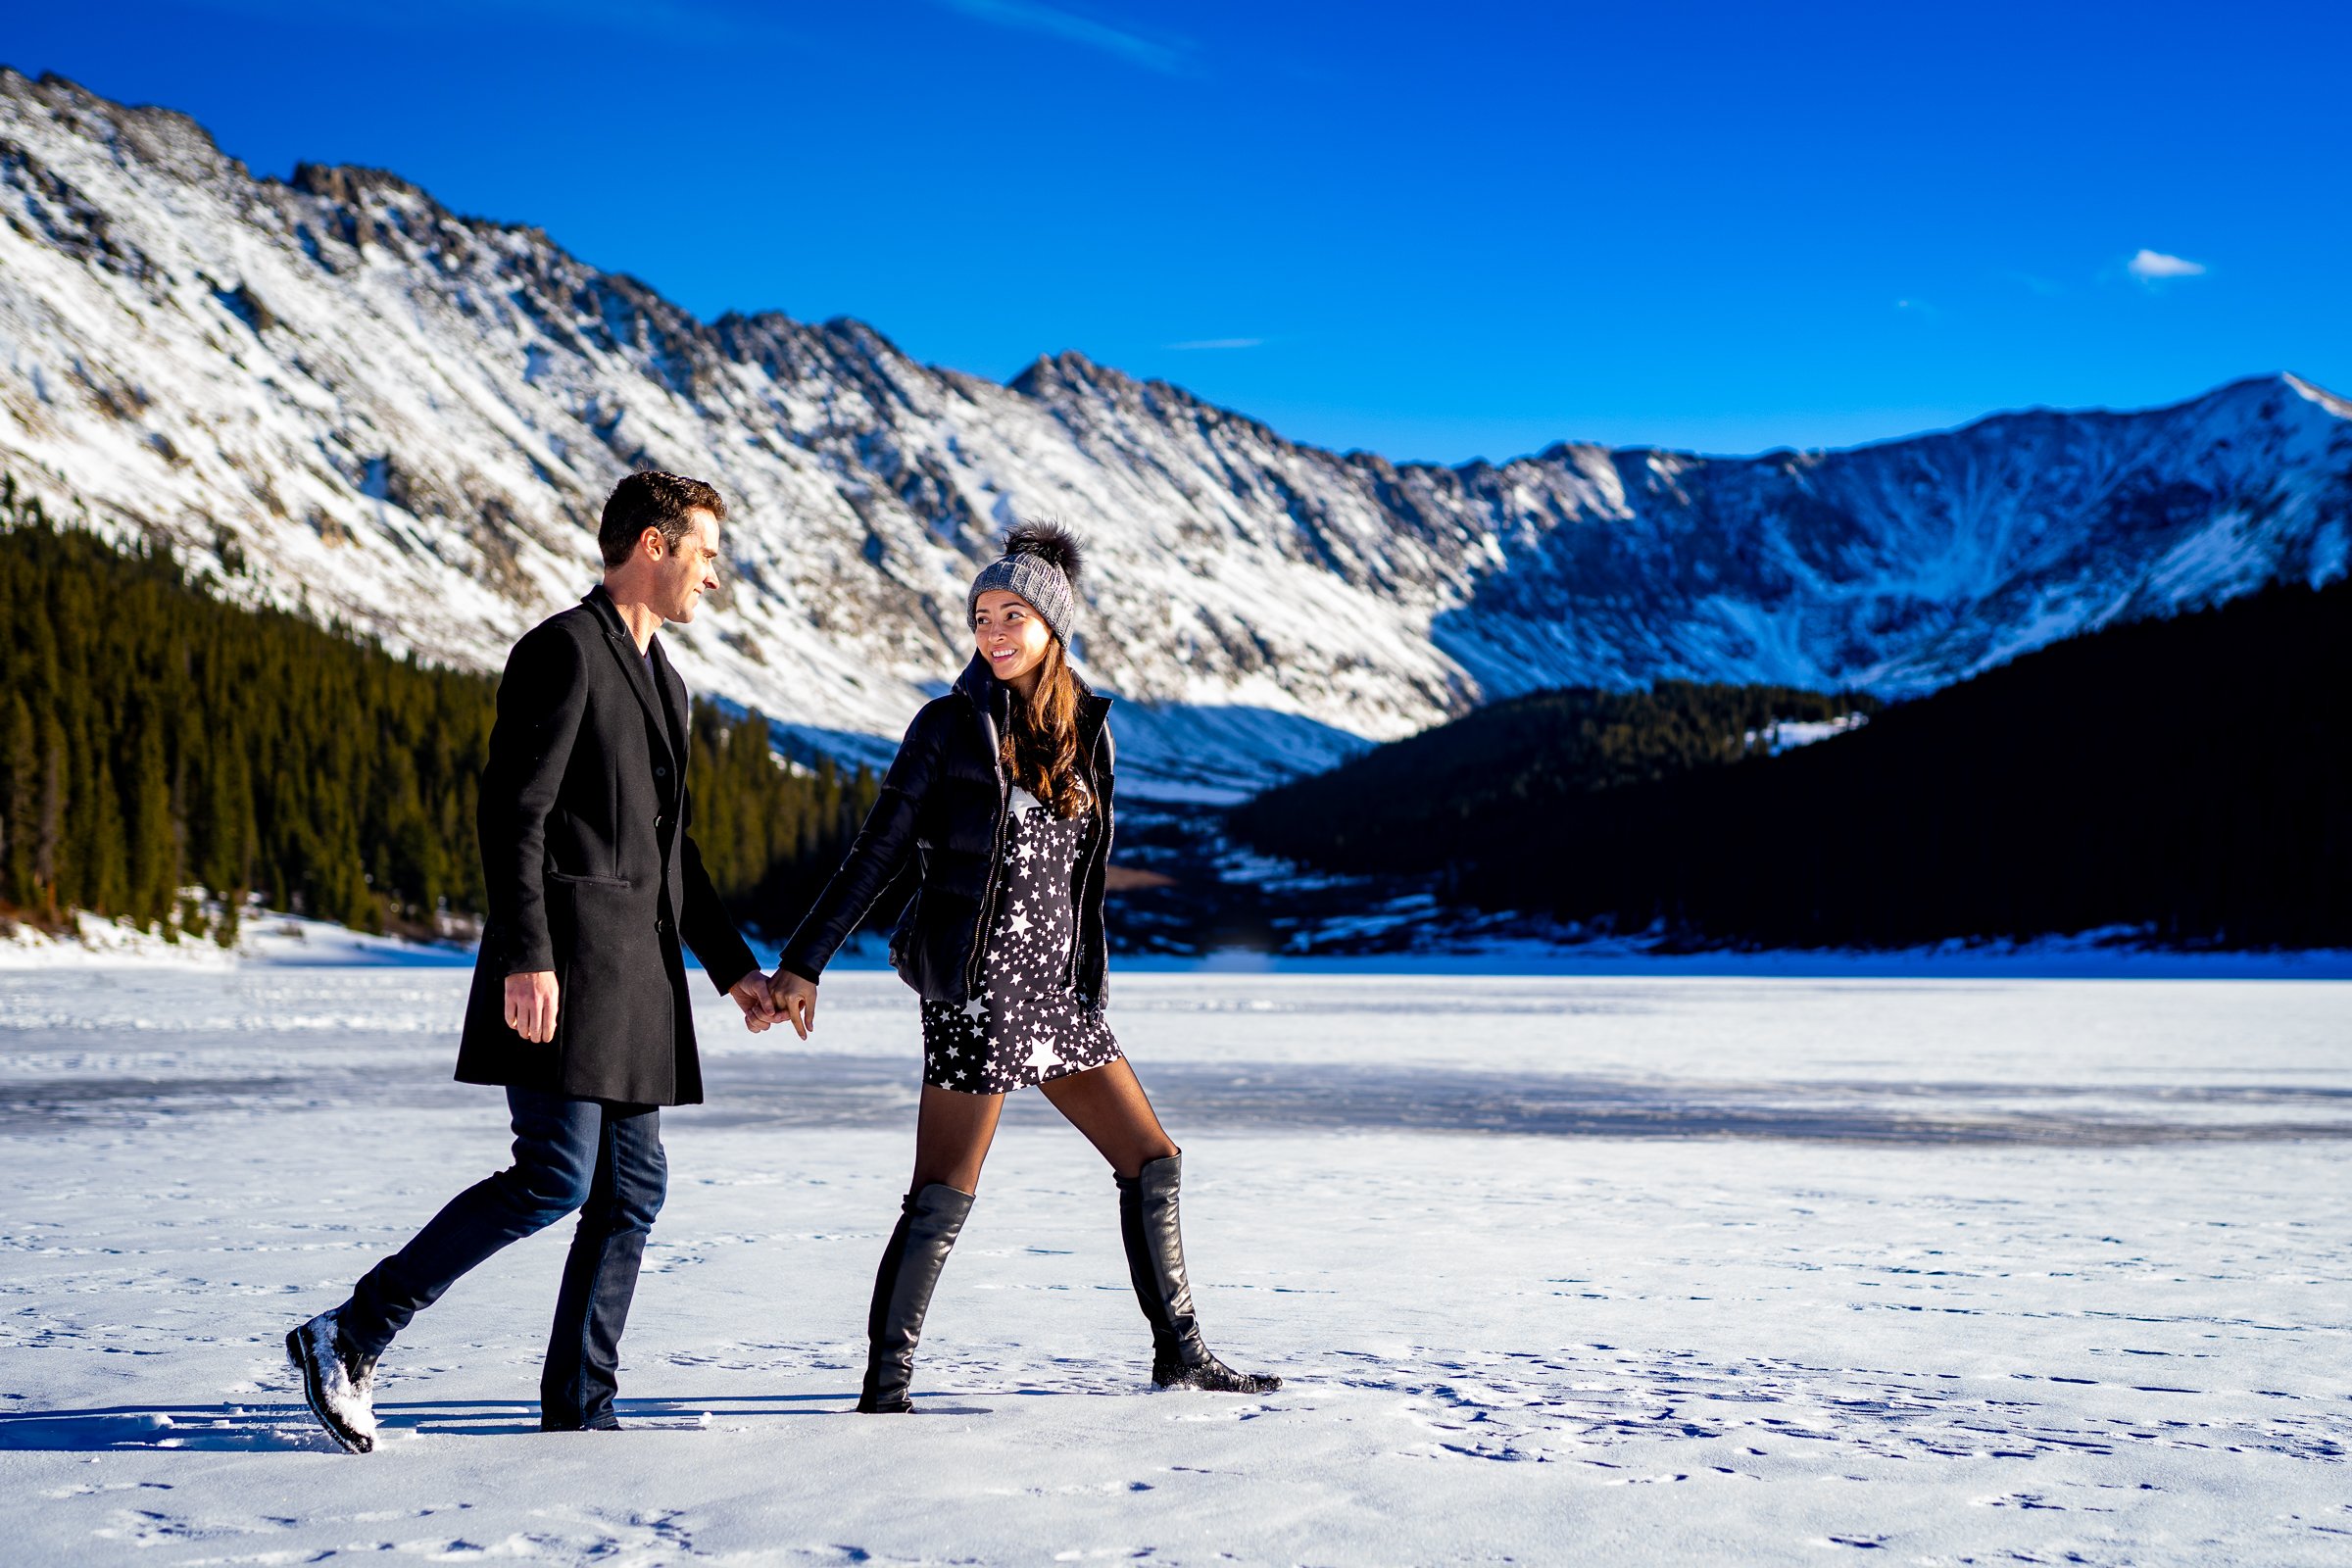 Engaged couple walks while holding hands on a frozen lake with snowcapped mountains in the background, Engagement Session, Engagement Photos, Engagement Photos Inspiration, Engagement Photography, Engagement Photographer, Winter Engagement Photos, Proposal Photos, Proposal Photographer, Proposal Photography, Winter Proposal, Mountain Proposal, Proposal Inspiration, Summit County engagement session, Summit County engagement photos, Summit County engagement photography, Summit County engagement photographer, Summit County engagement inspiration, Colorado engagement session, Colorado engagement photos, Colorado engagement photography, Colorado engagement photographer, Colorado engagement inspiration, Clinton Gulch Engagement